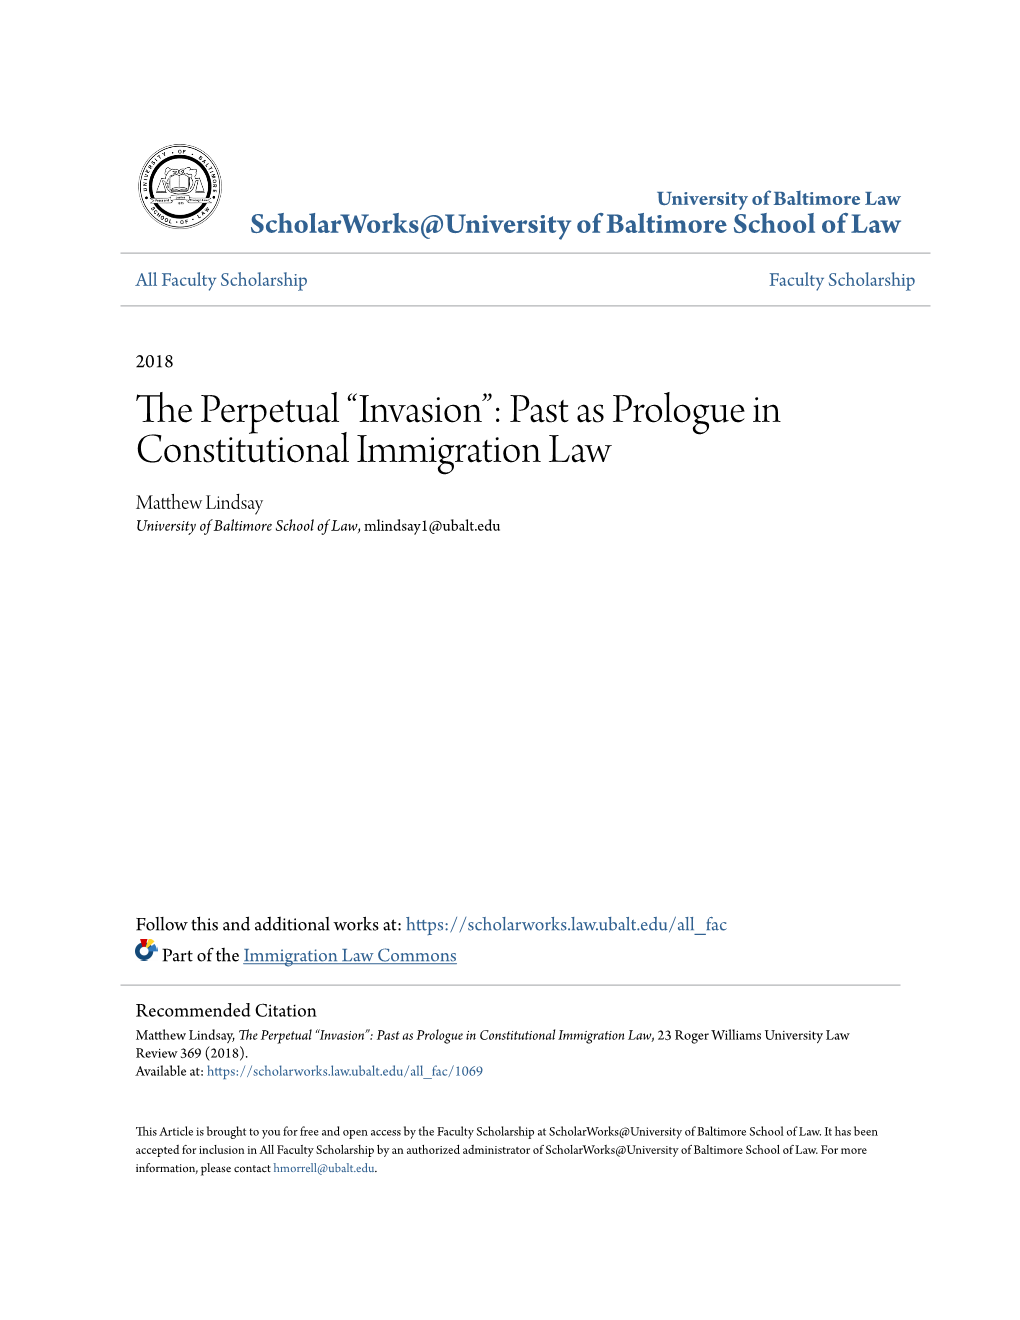 Past As Prologue in Constitutional Immigration Law Matthew Lindsay University of Baltimore School of Law, Mlindsay1@Ubalt.Edu